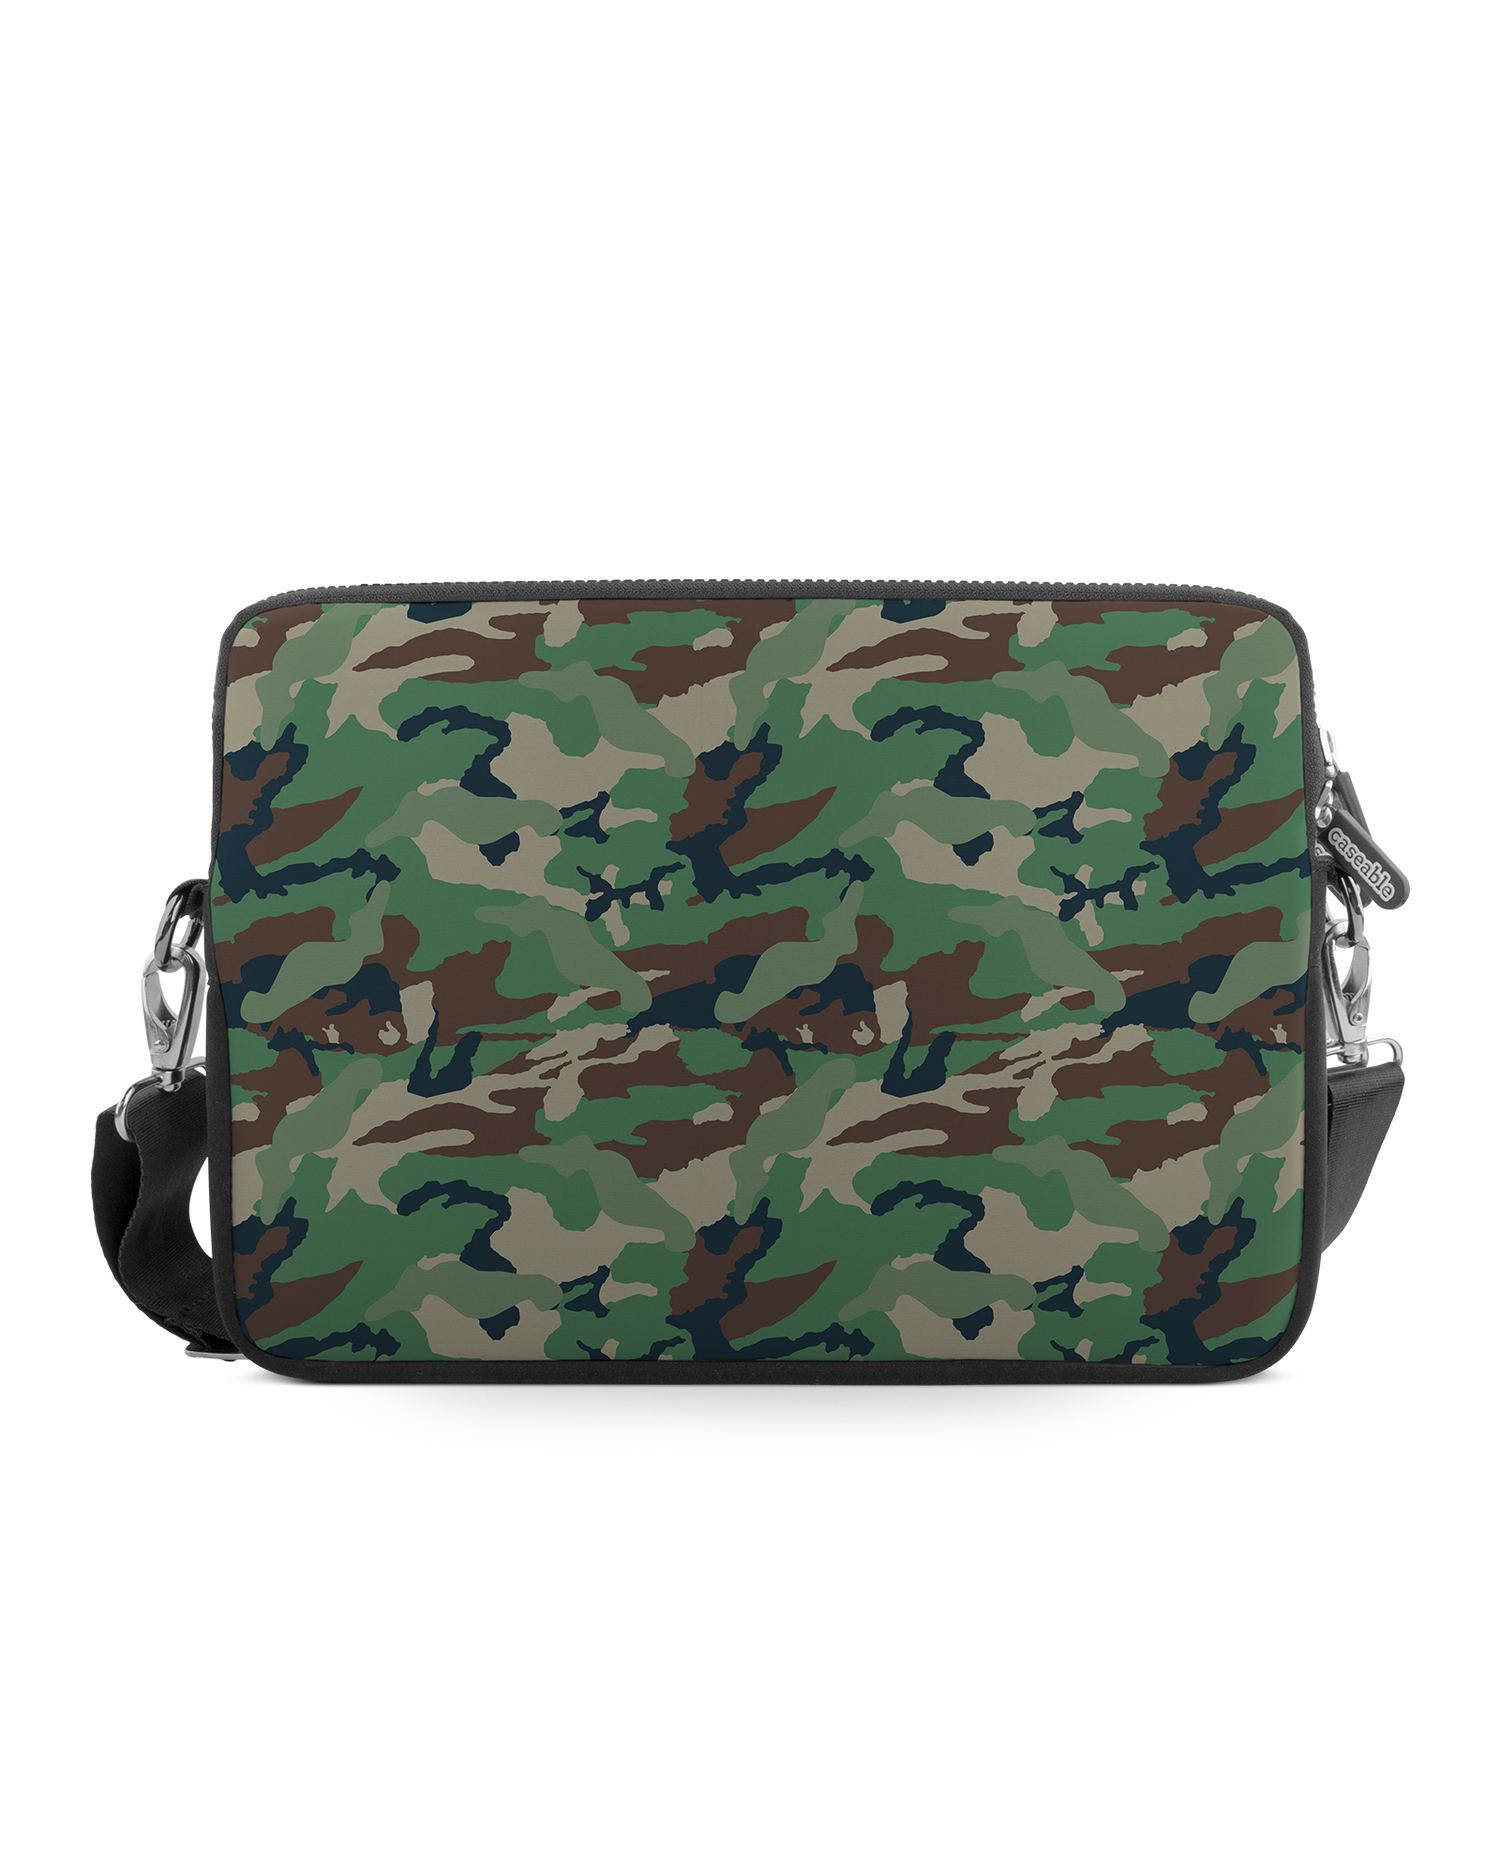 Green and Brown Camo Premium Laptop Bag 13-14 inch: Front View